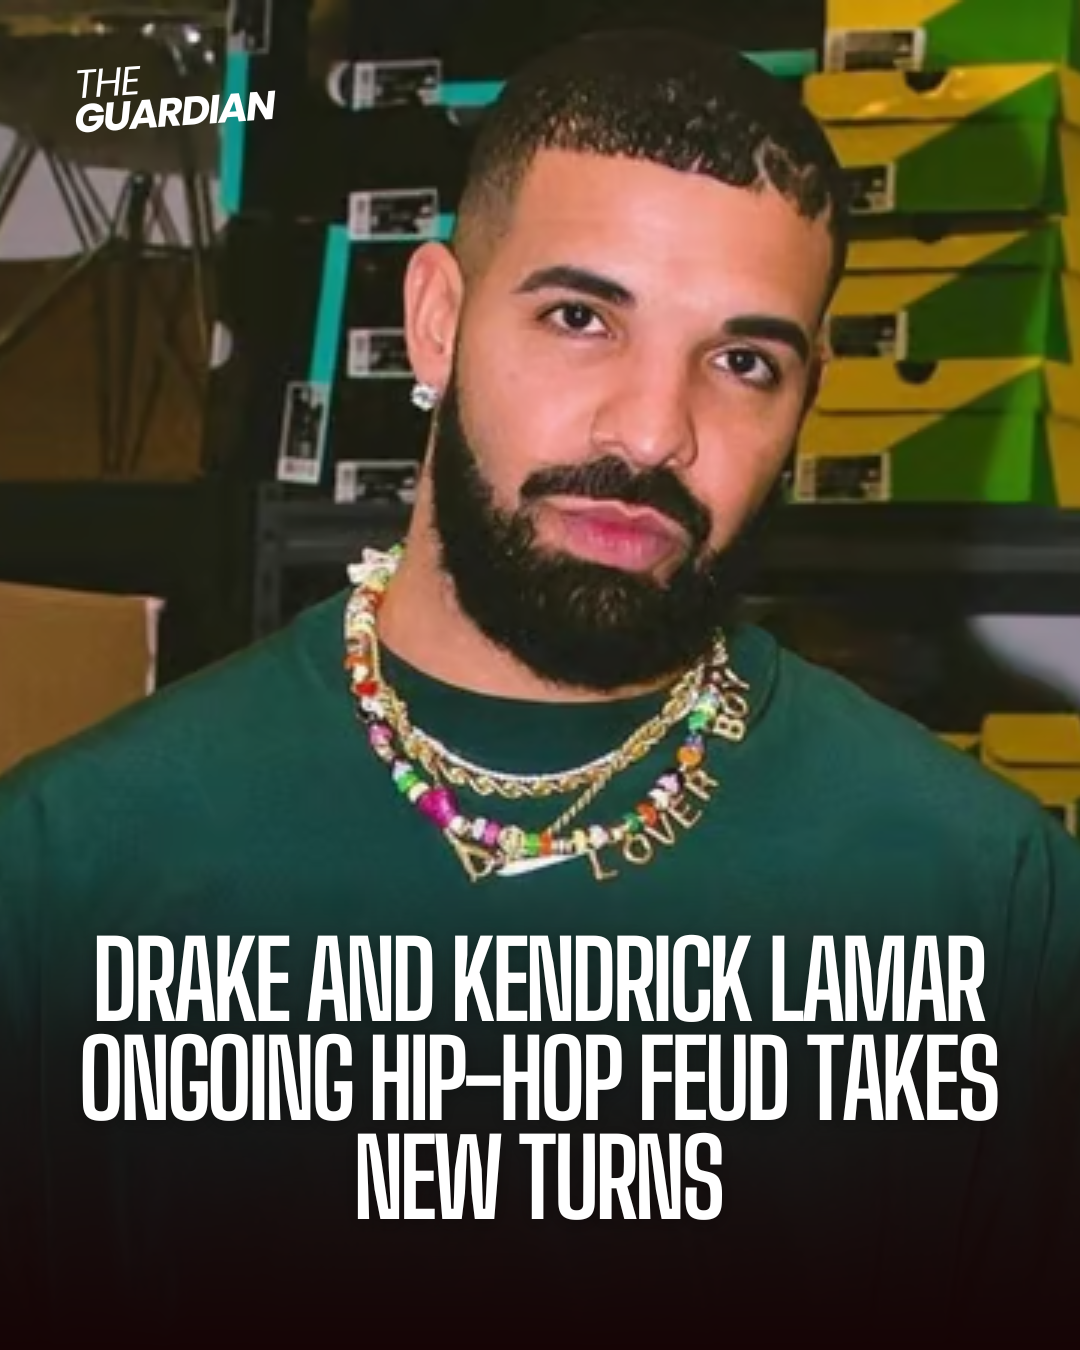 Drake and Kendrick Lamar's feud has escalated with a series of diss tracks exchanged between the two musicians.